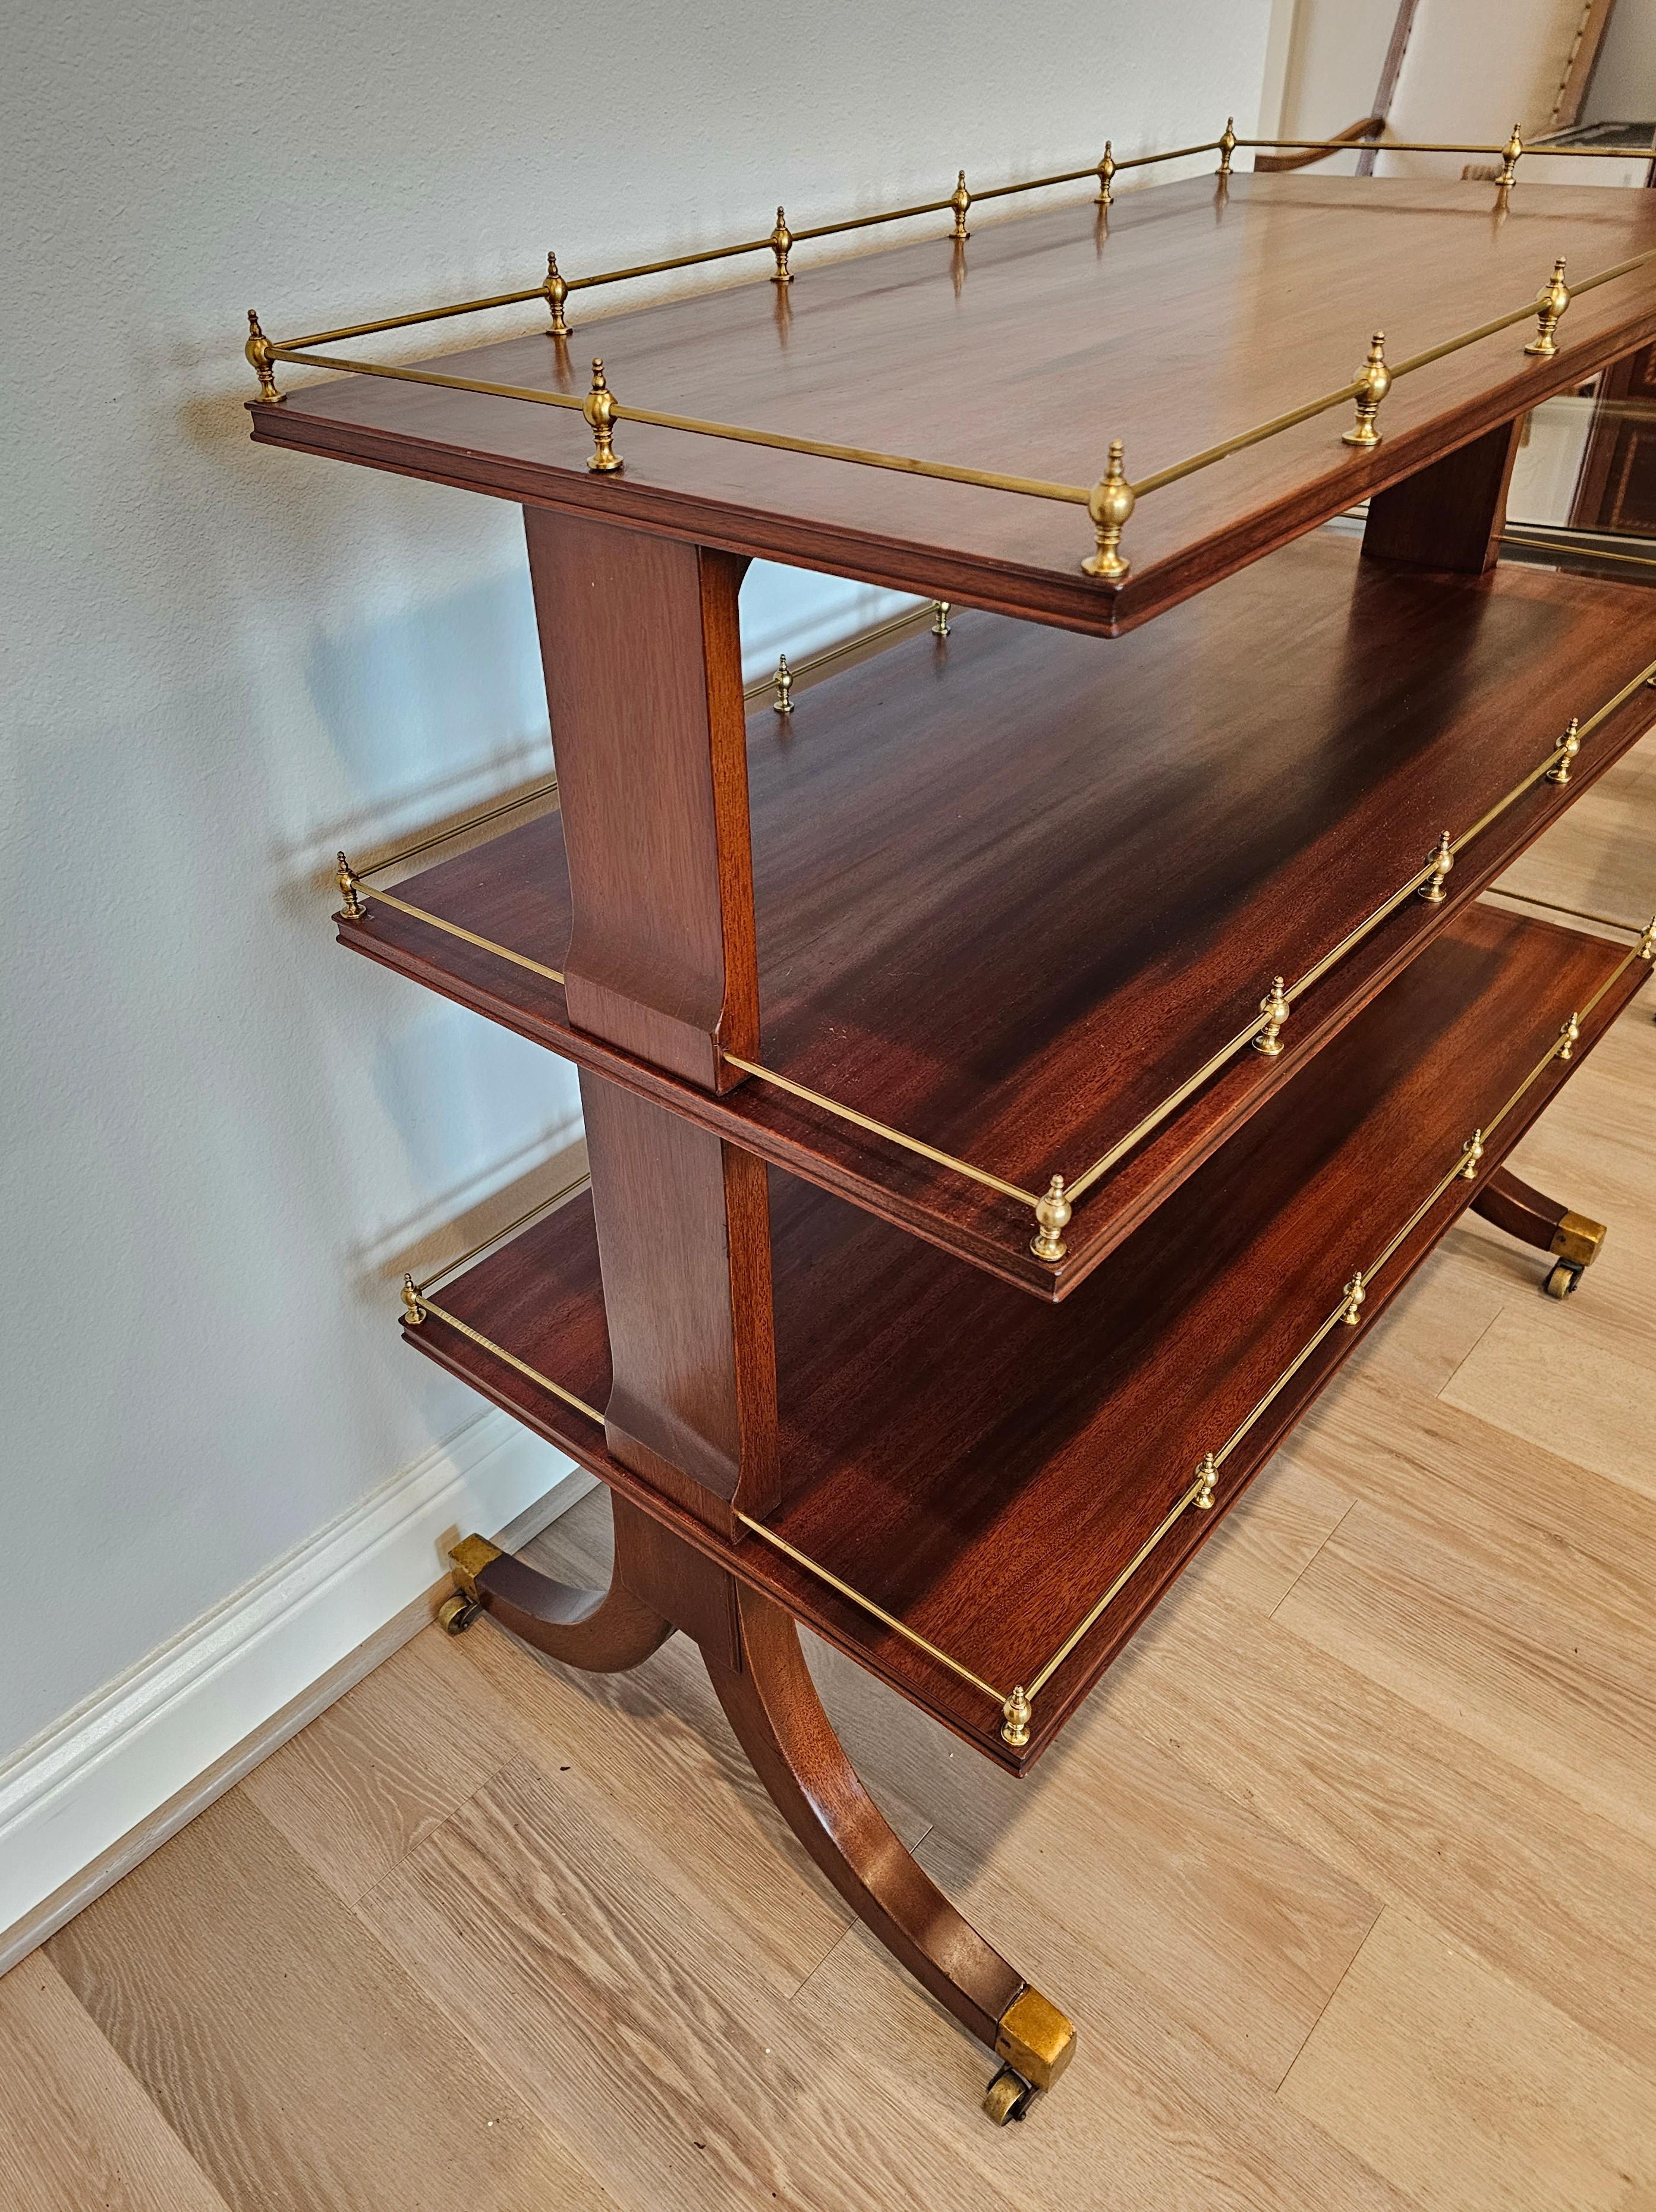 American Tiered Mahogany Drinks Trolley Dessert Server Marlboro Manor by Sacks In Good Condition For Sale In Forney, TX